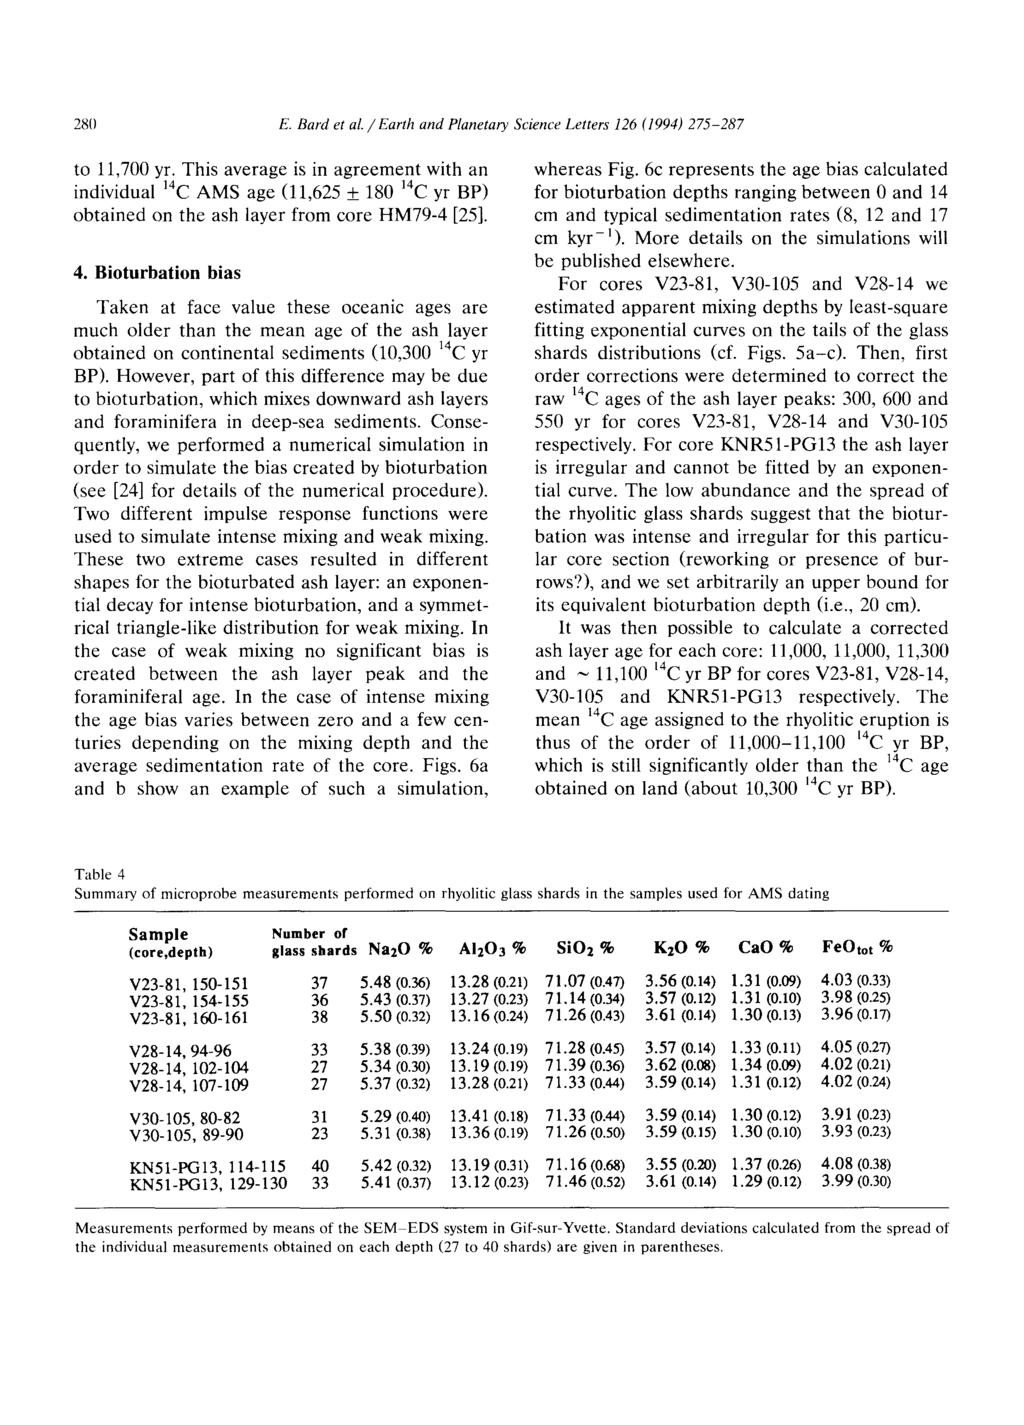 280 E. Bard et al / Earth and Planetary Science Letters 126 (1994) 275-287 to 11,700 yr.